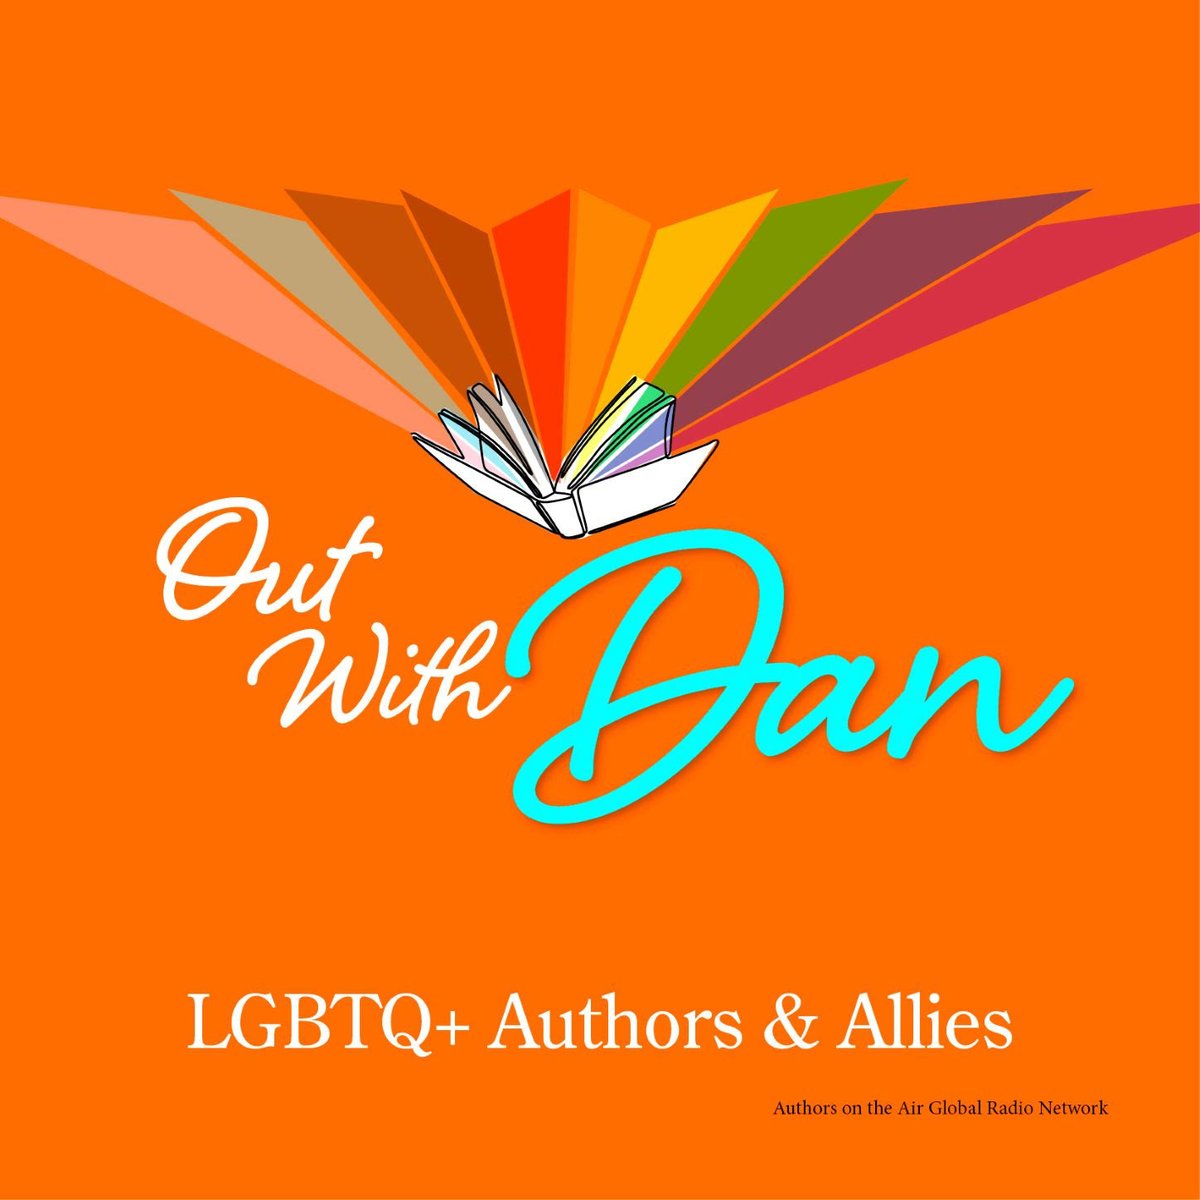 Our Fiction Contest judge, Greg Herren, spoke with Dan White on his podcast Out With Dan! Out with Dan is a podcast hosted by Dan White that highlights LGBTQ+ authors and allies. Check it out! youtu.be/LEG0WmGLNEY?si…